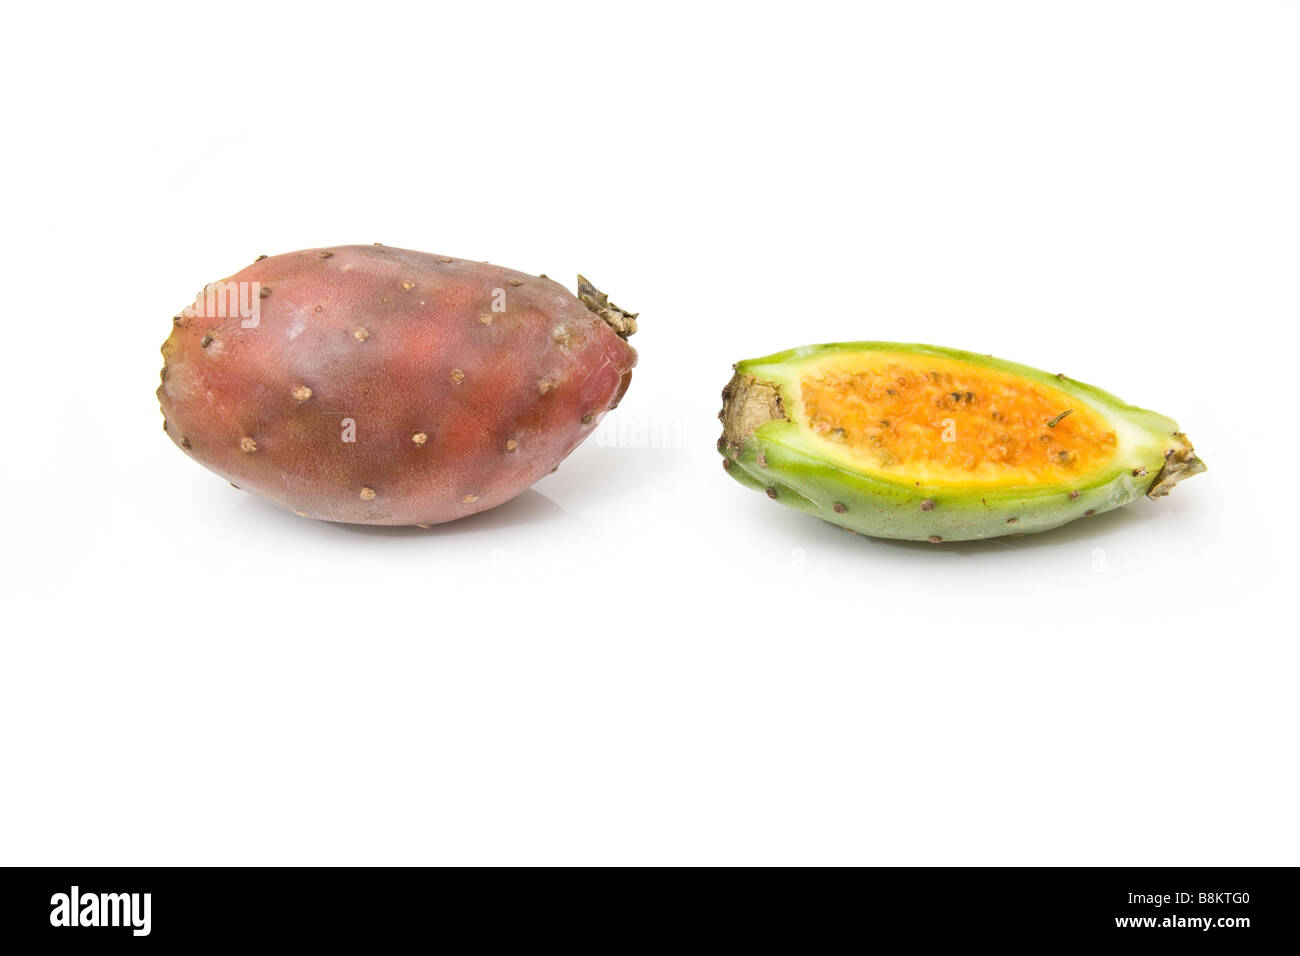 Cactus fruit prickly pears isolated on a white studio background Stock Photo